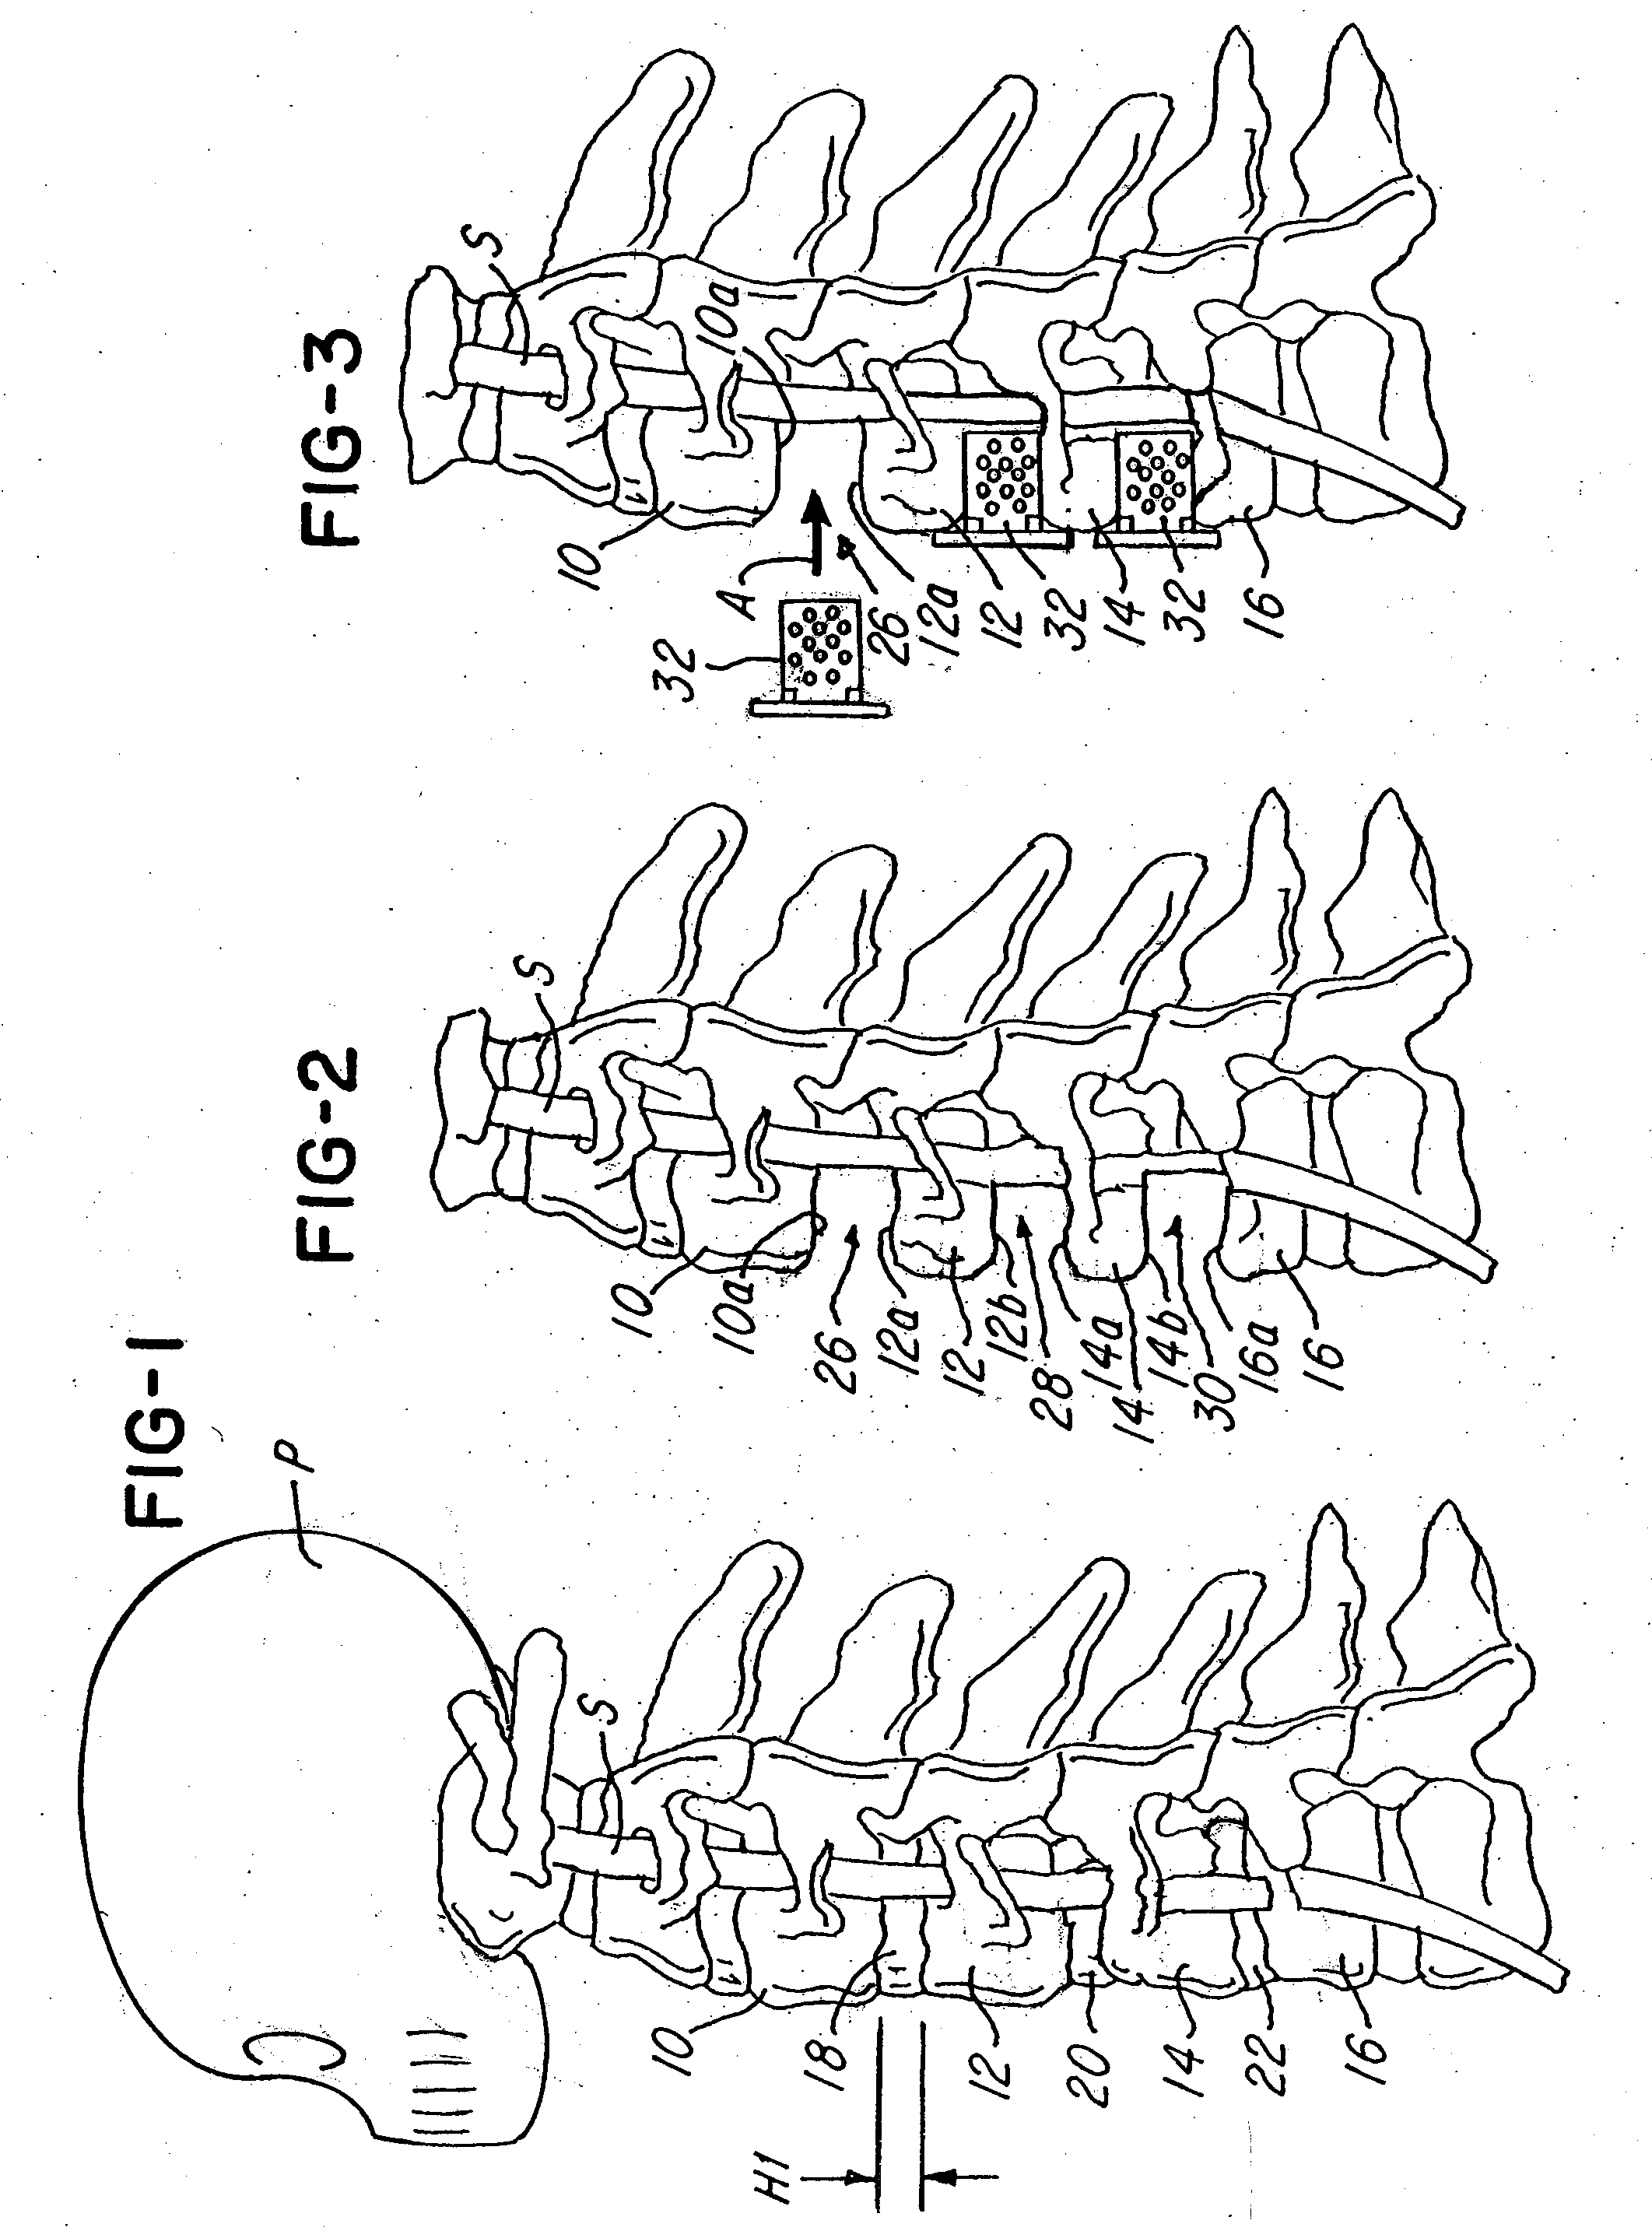 Spinal fusion system utilizing an implant plate having at least one integral lock